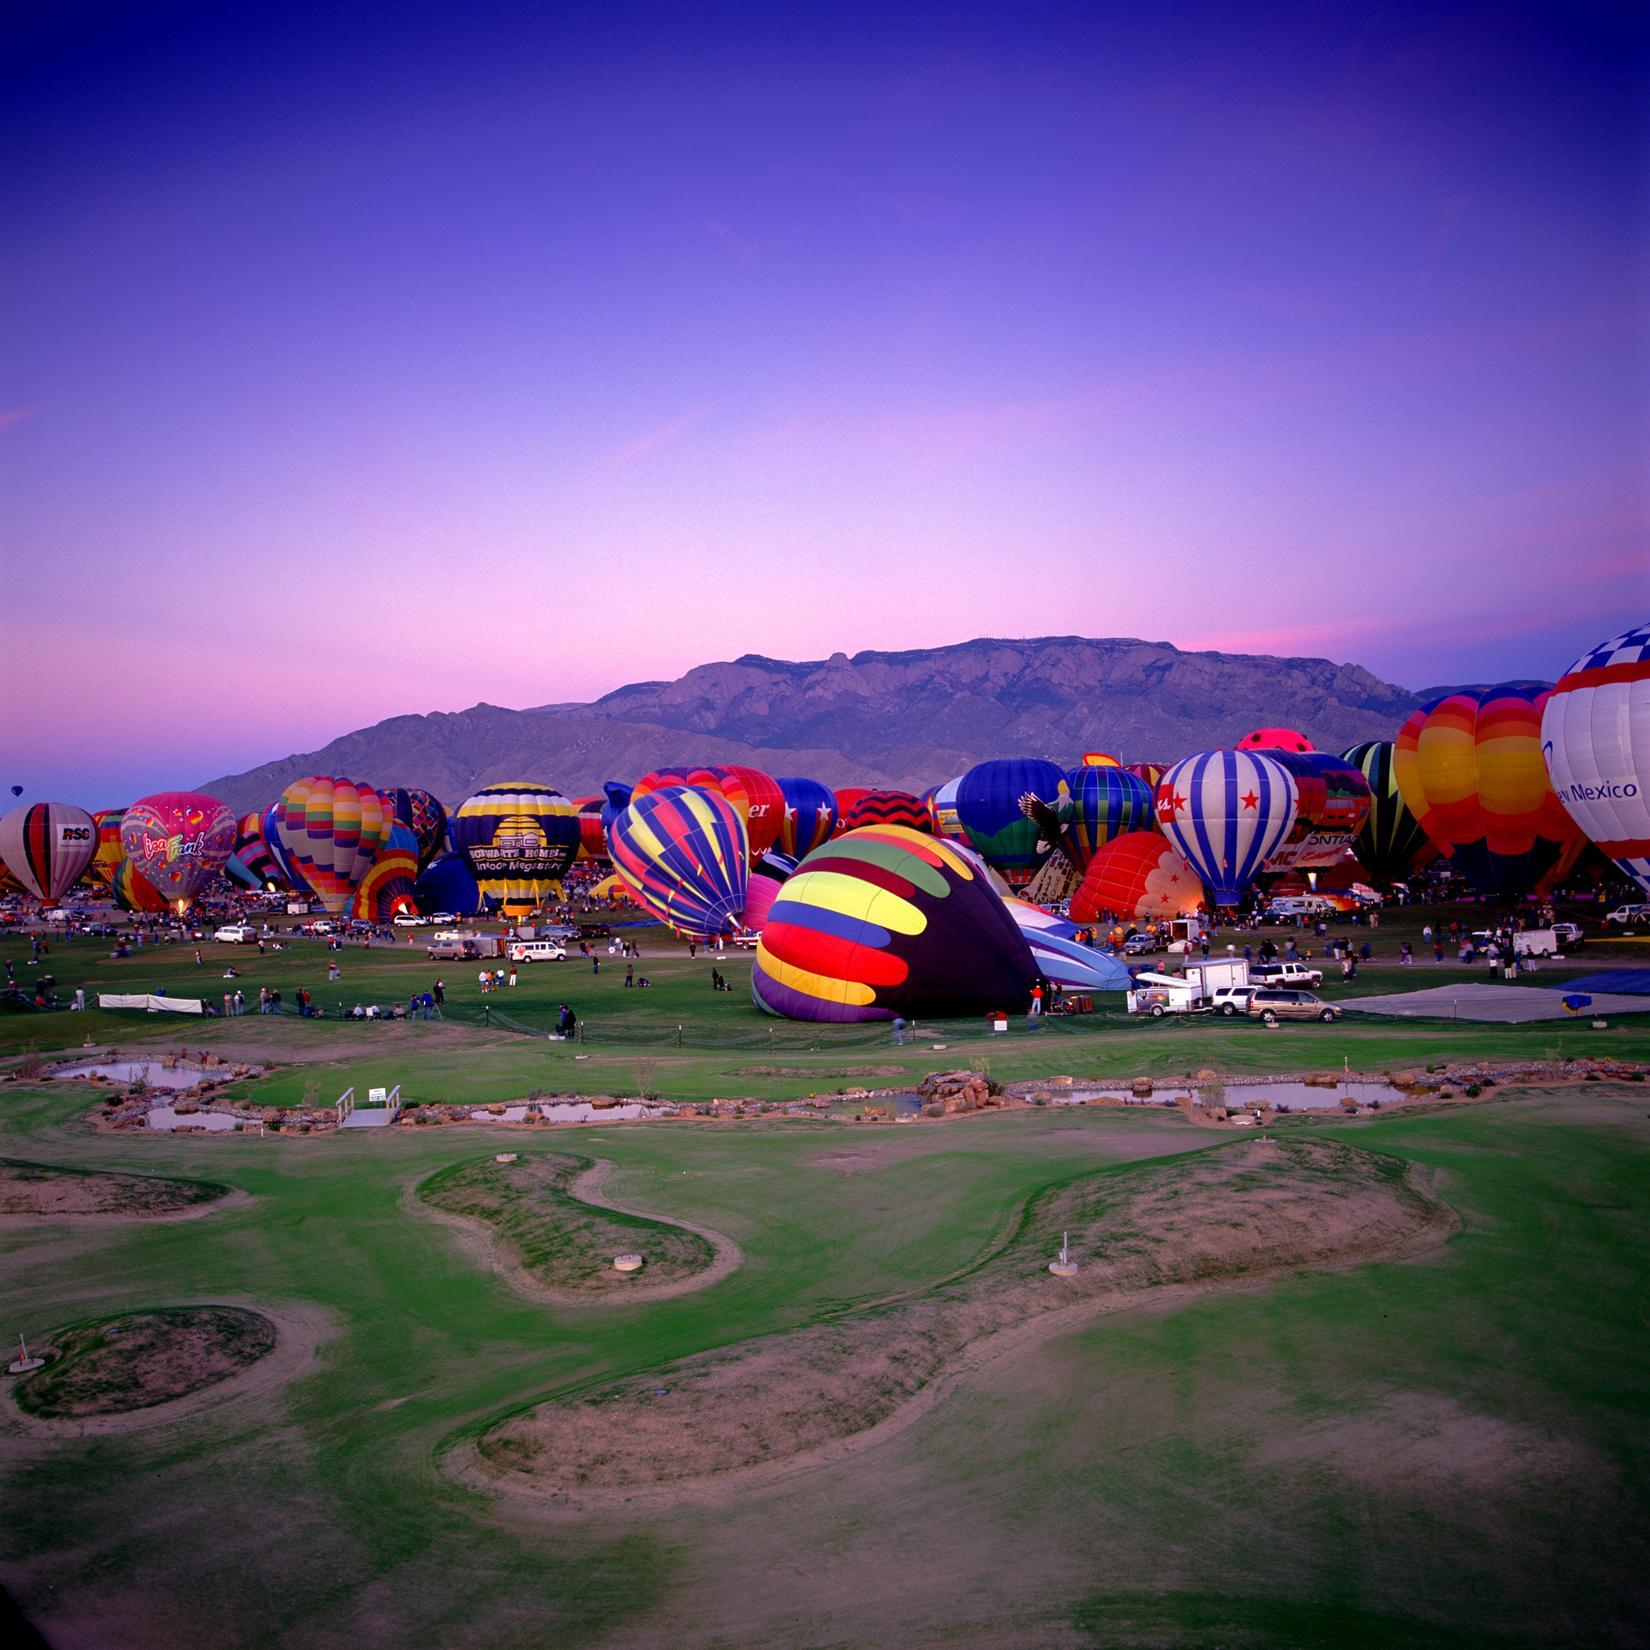 Cross It Off Your Bucket List: You Can Win a Trip to the Albuquerque